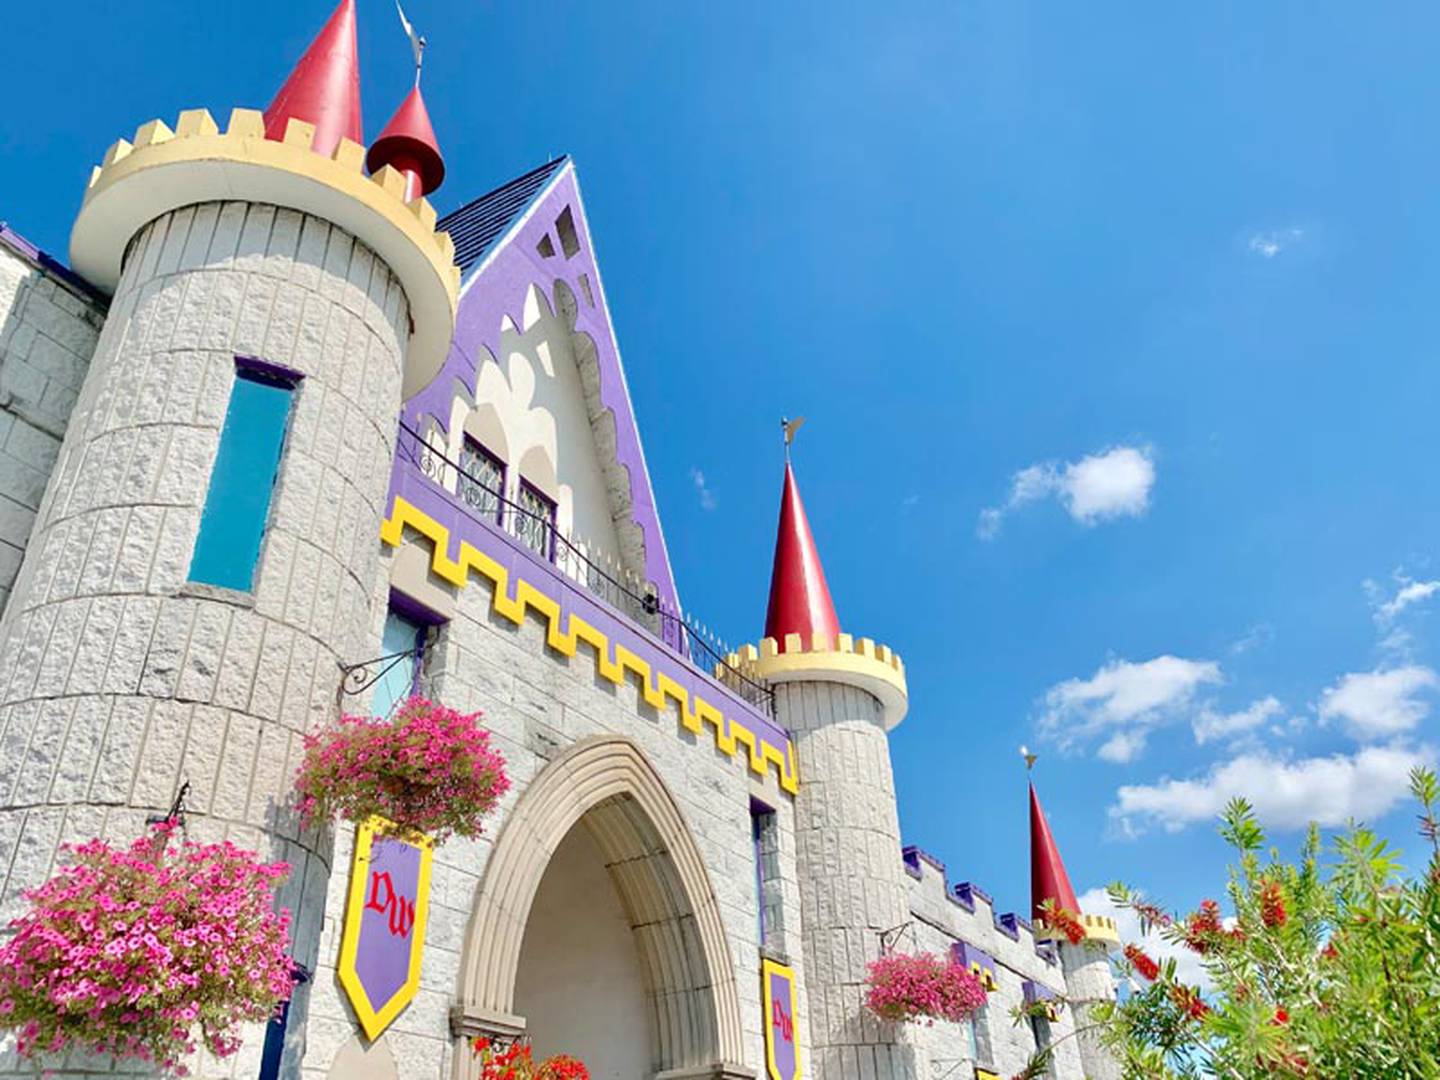 Dutch Wonderland, a small theme park in Lancaster County, Pennsylvania, greets visitors with a castle facade.